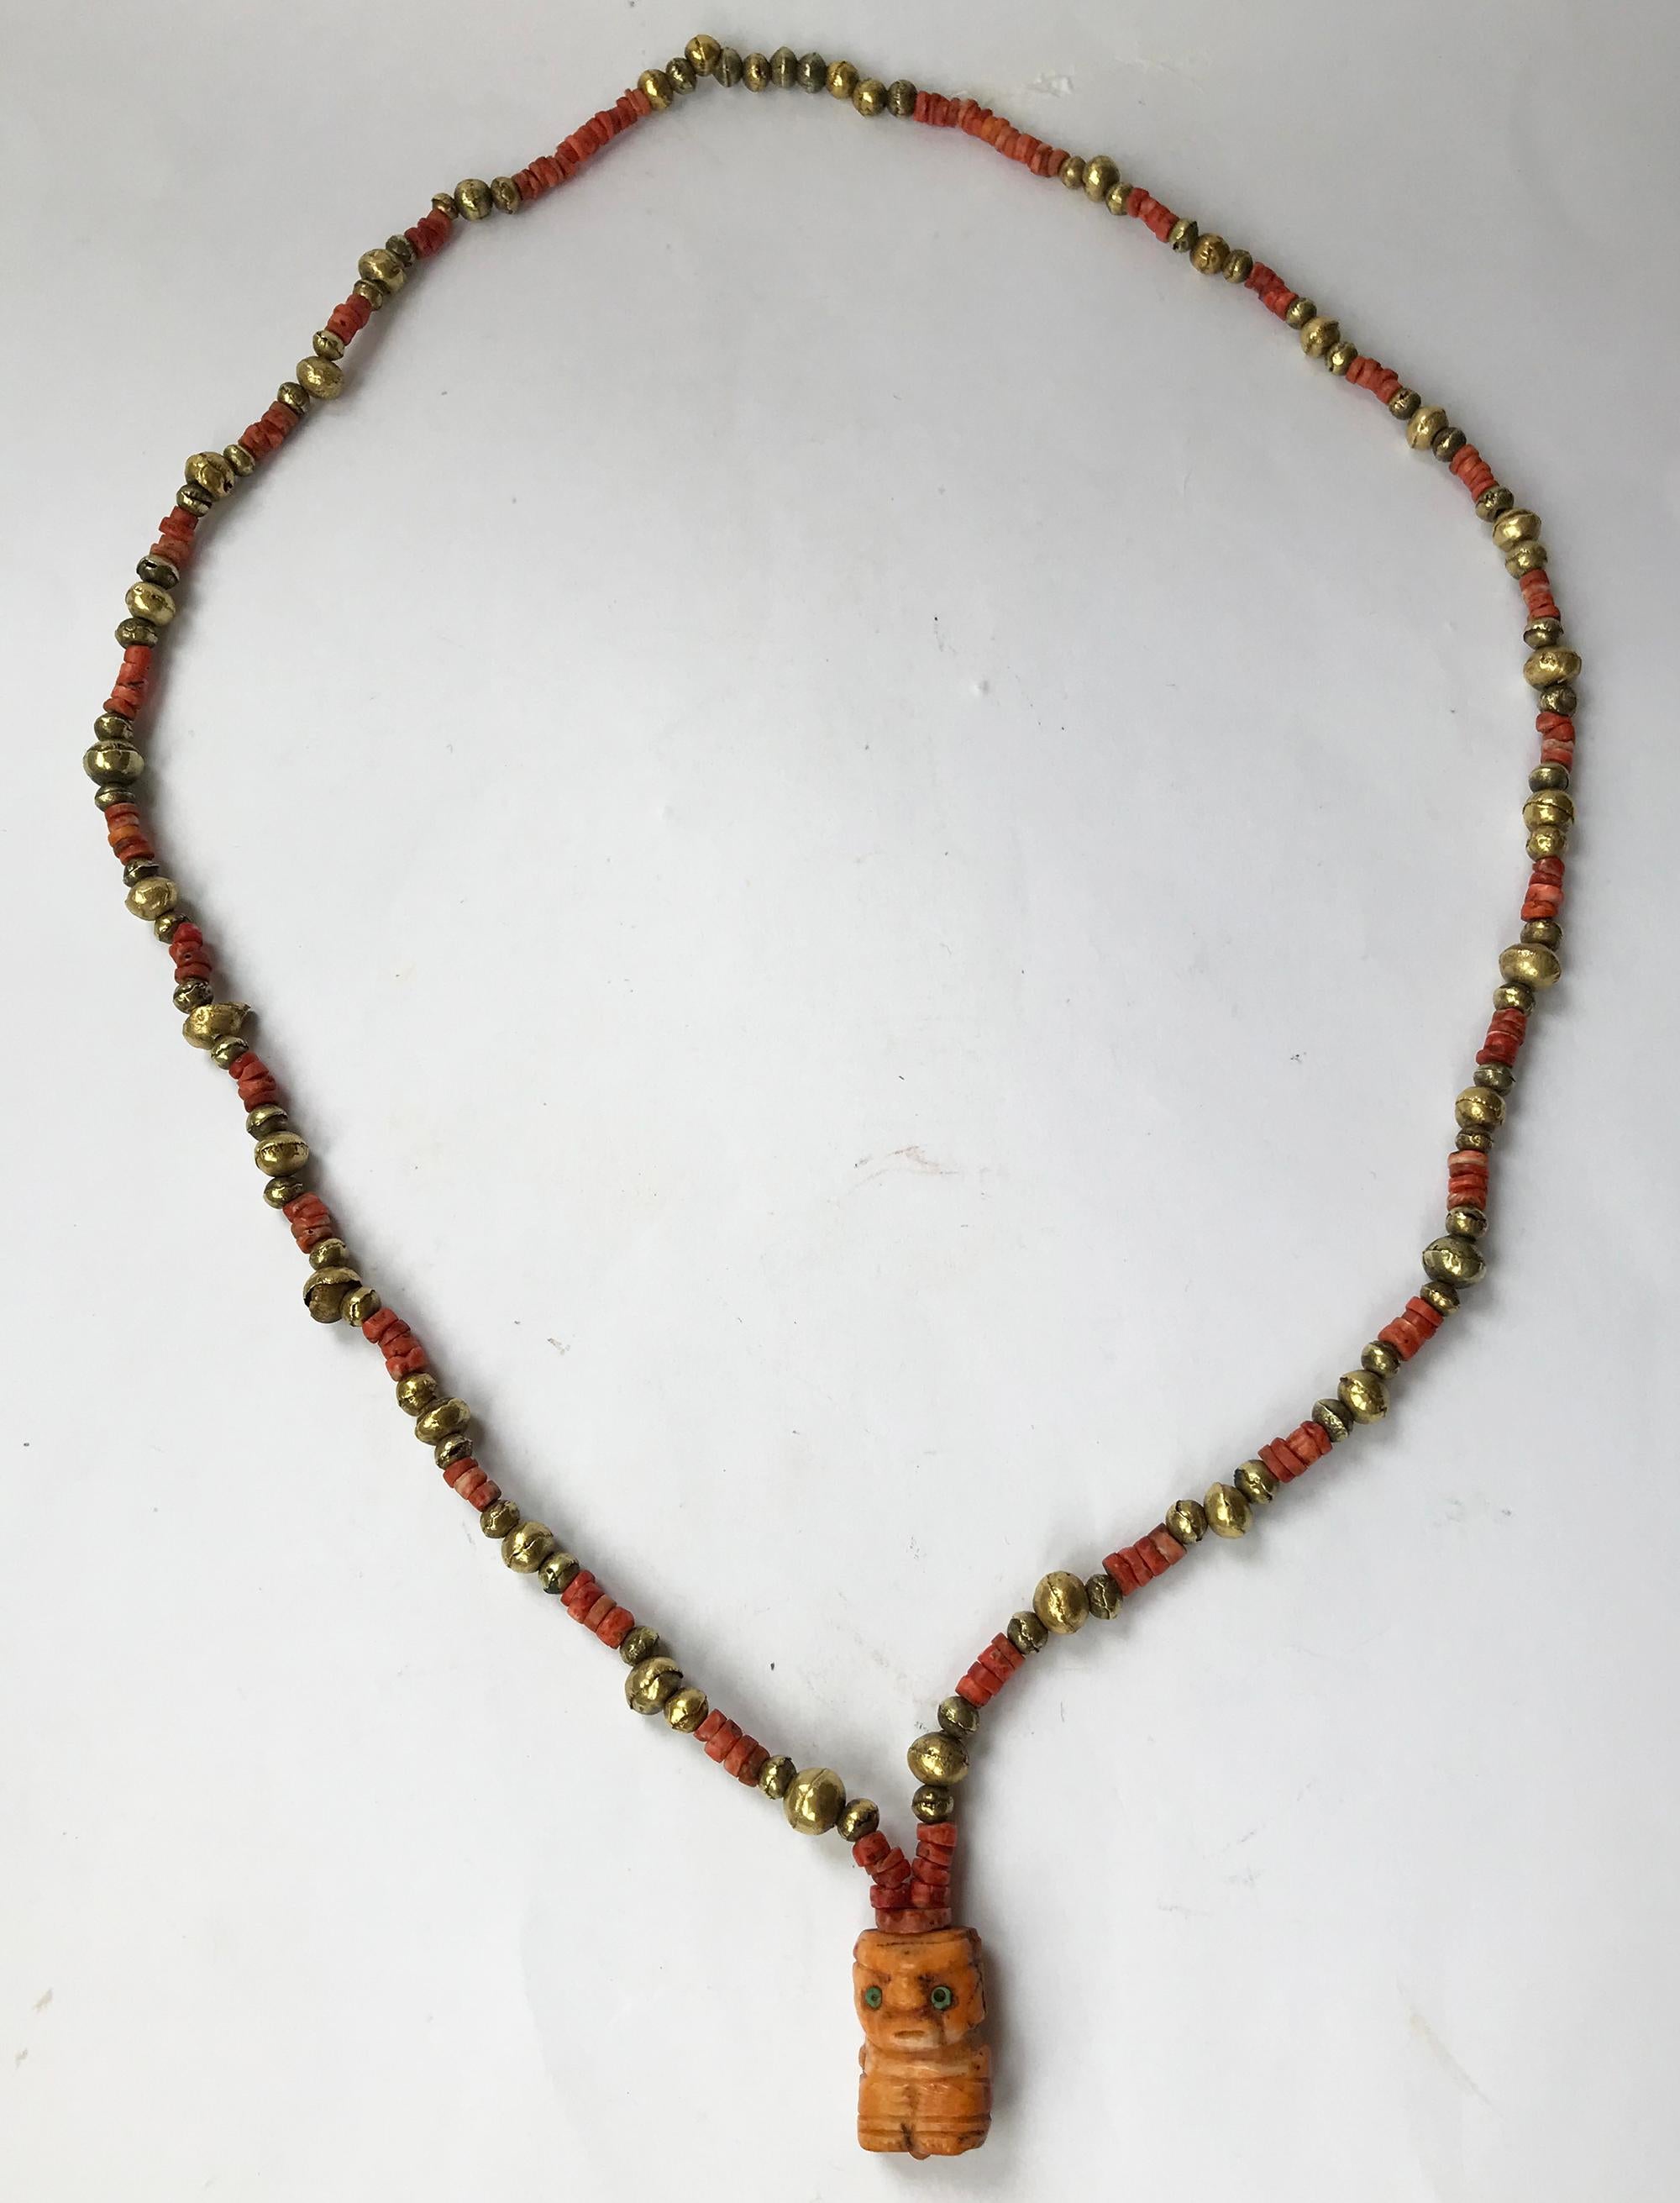 Hand-Crafted Pre Columbian Superb Gold Bead Spondylus Shell Necklace Chimu Tribal Jewelry